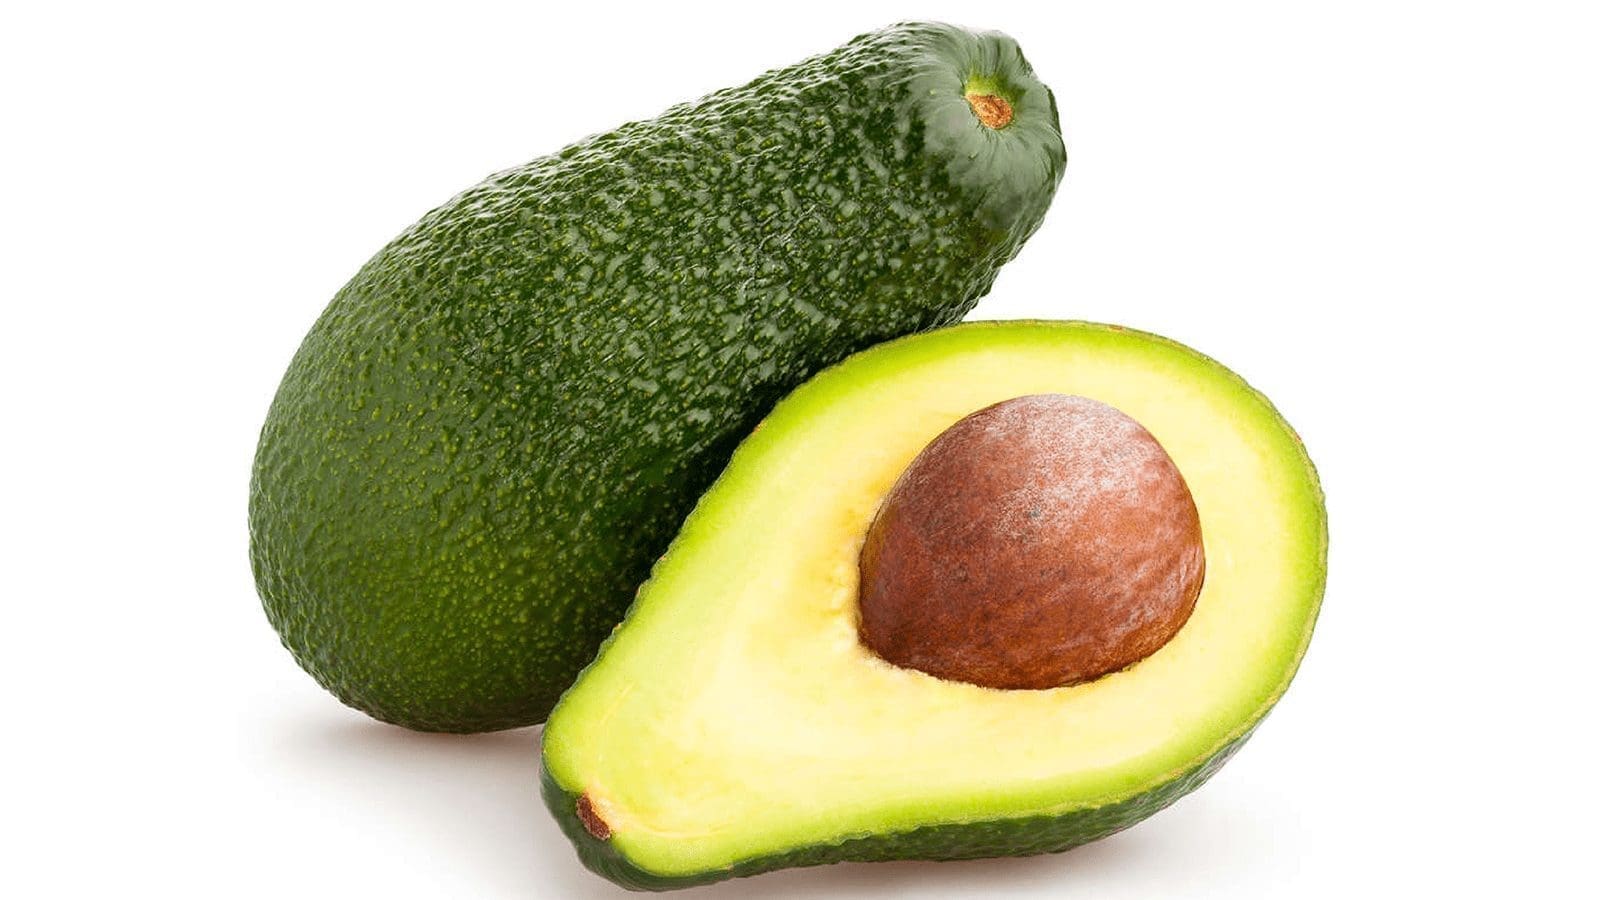 Moderate alcohol consumption does not benefit heart health, but 2 servings of avocado does